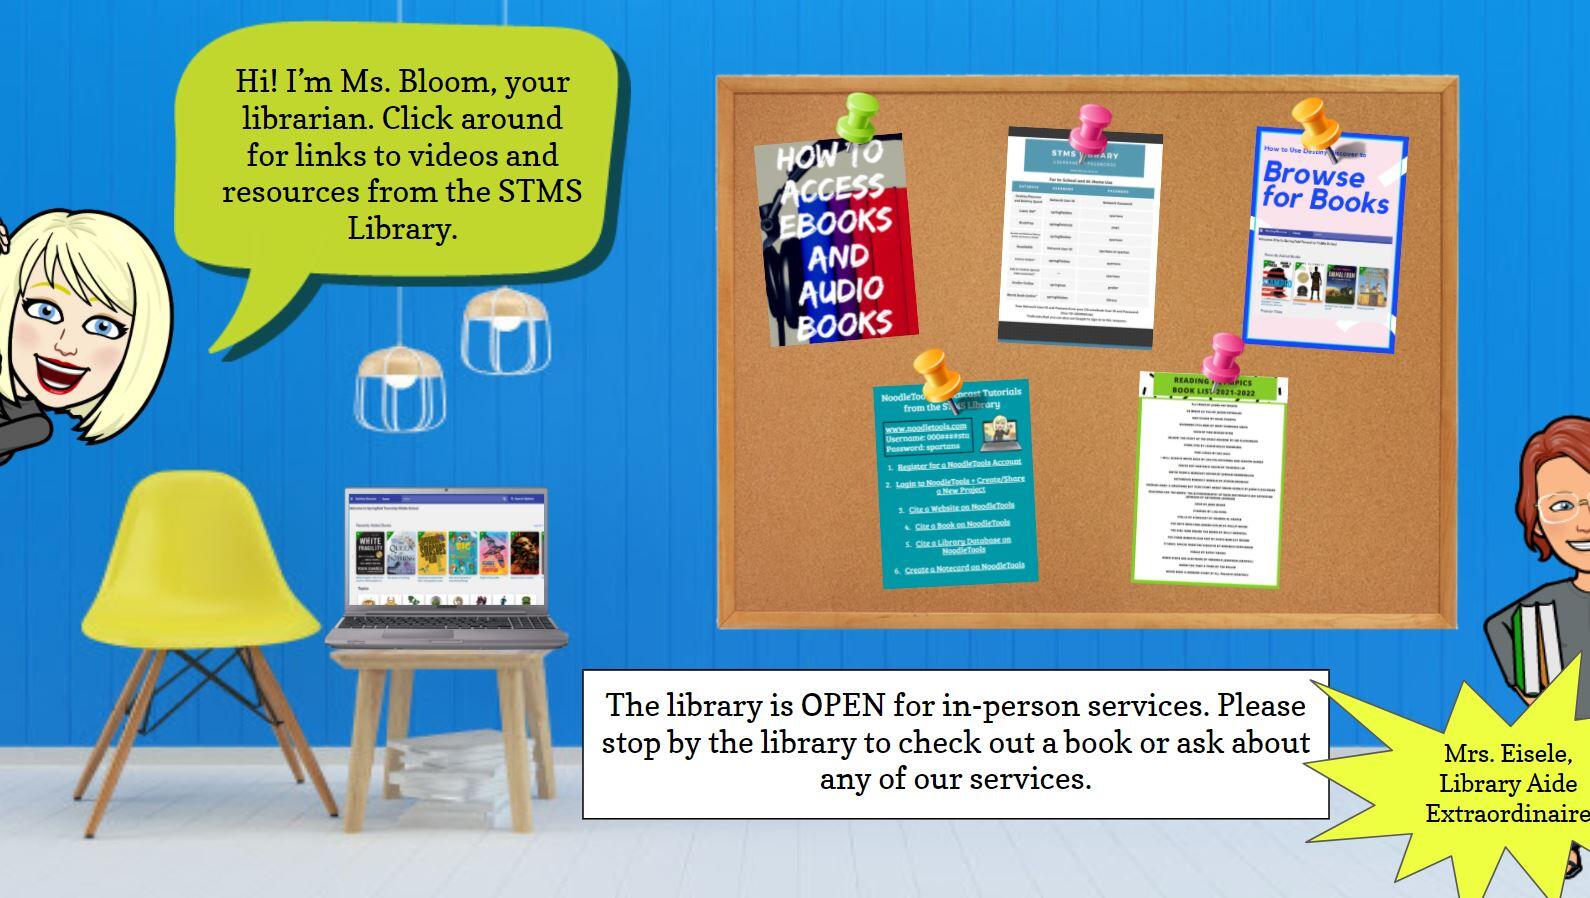 link to Ms. Bloom's google slide - depicts cartoon version of Ms. Bloom and Mrs. Eisele. Bloom character states: Hi, I'm Ms. Bloom, your librarian. Click around for links to videos and resources from the STMS library. It shows a bulletin board with 5 papers on it. How to access ebooks and audio books, the rest of the papers have font that is too small to read. Bottom of the page states: The library is OPEN for in person services. Please stop by the library to check out a book or ask about any of our services.. There is also a table with a laptop on it, depicting images on the screen (too small to see what it is) blurb near Eisele character that states Mrs. Eisele Library Aide Extraordinaire